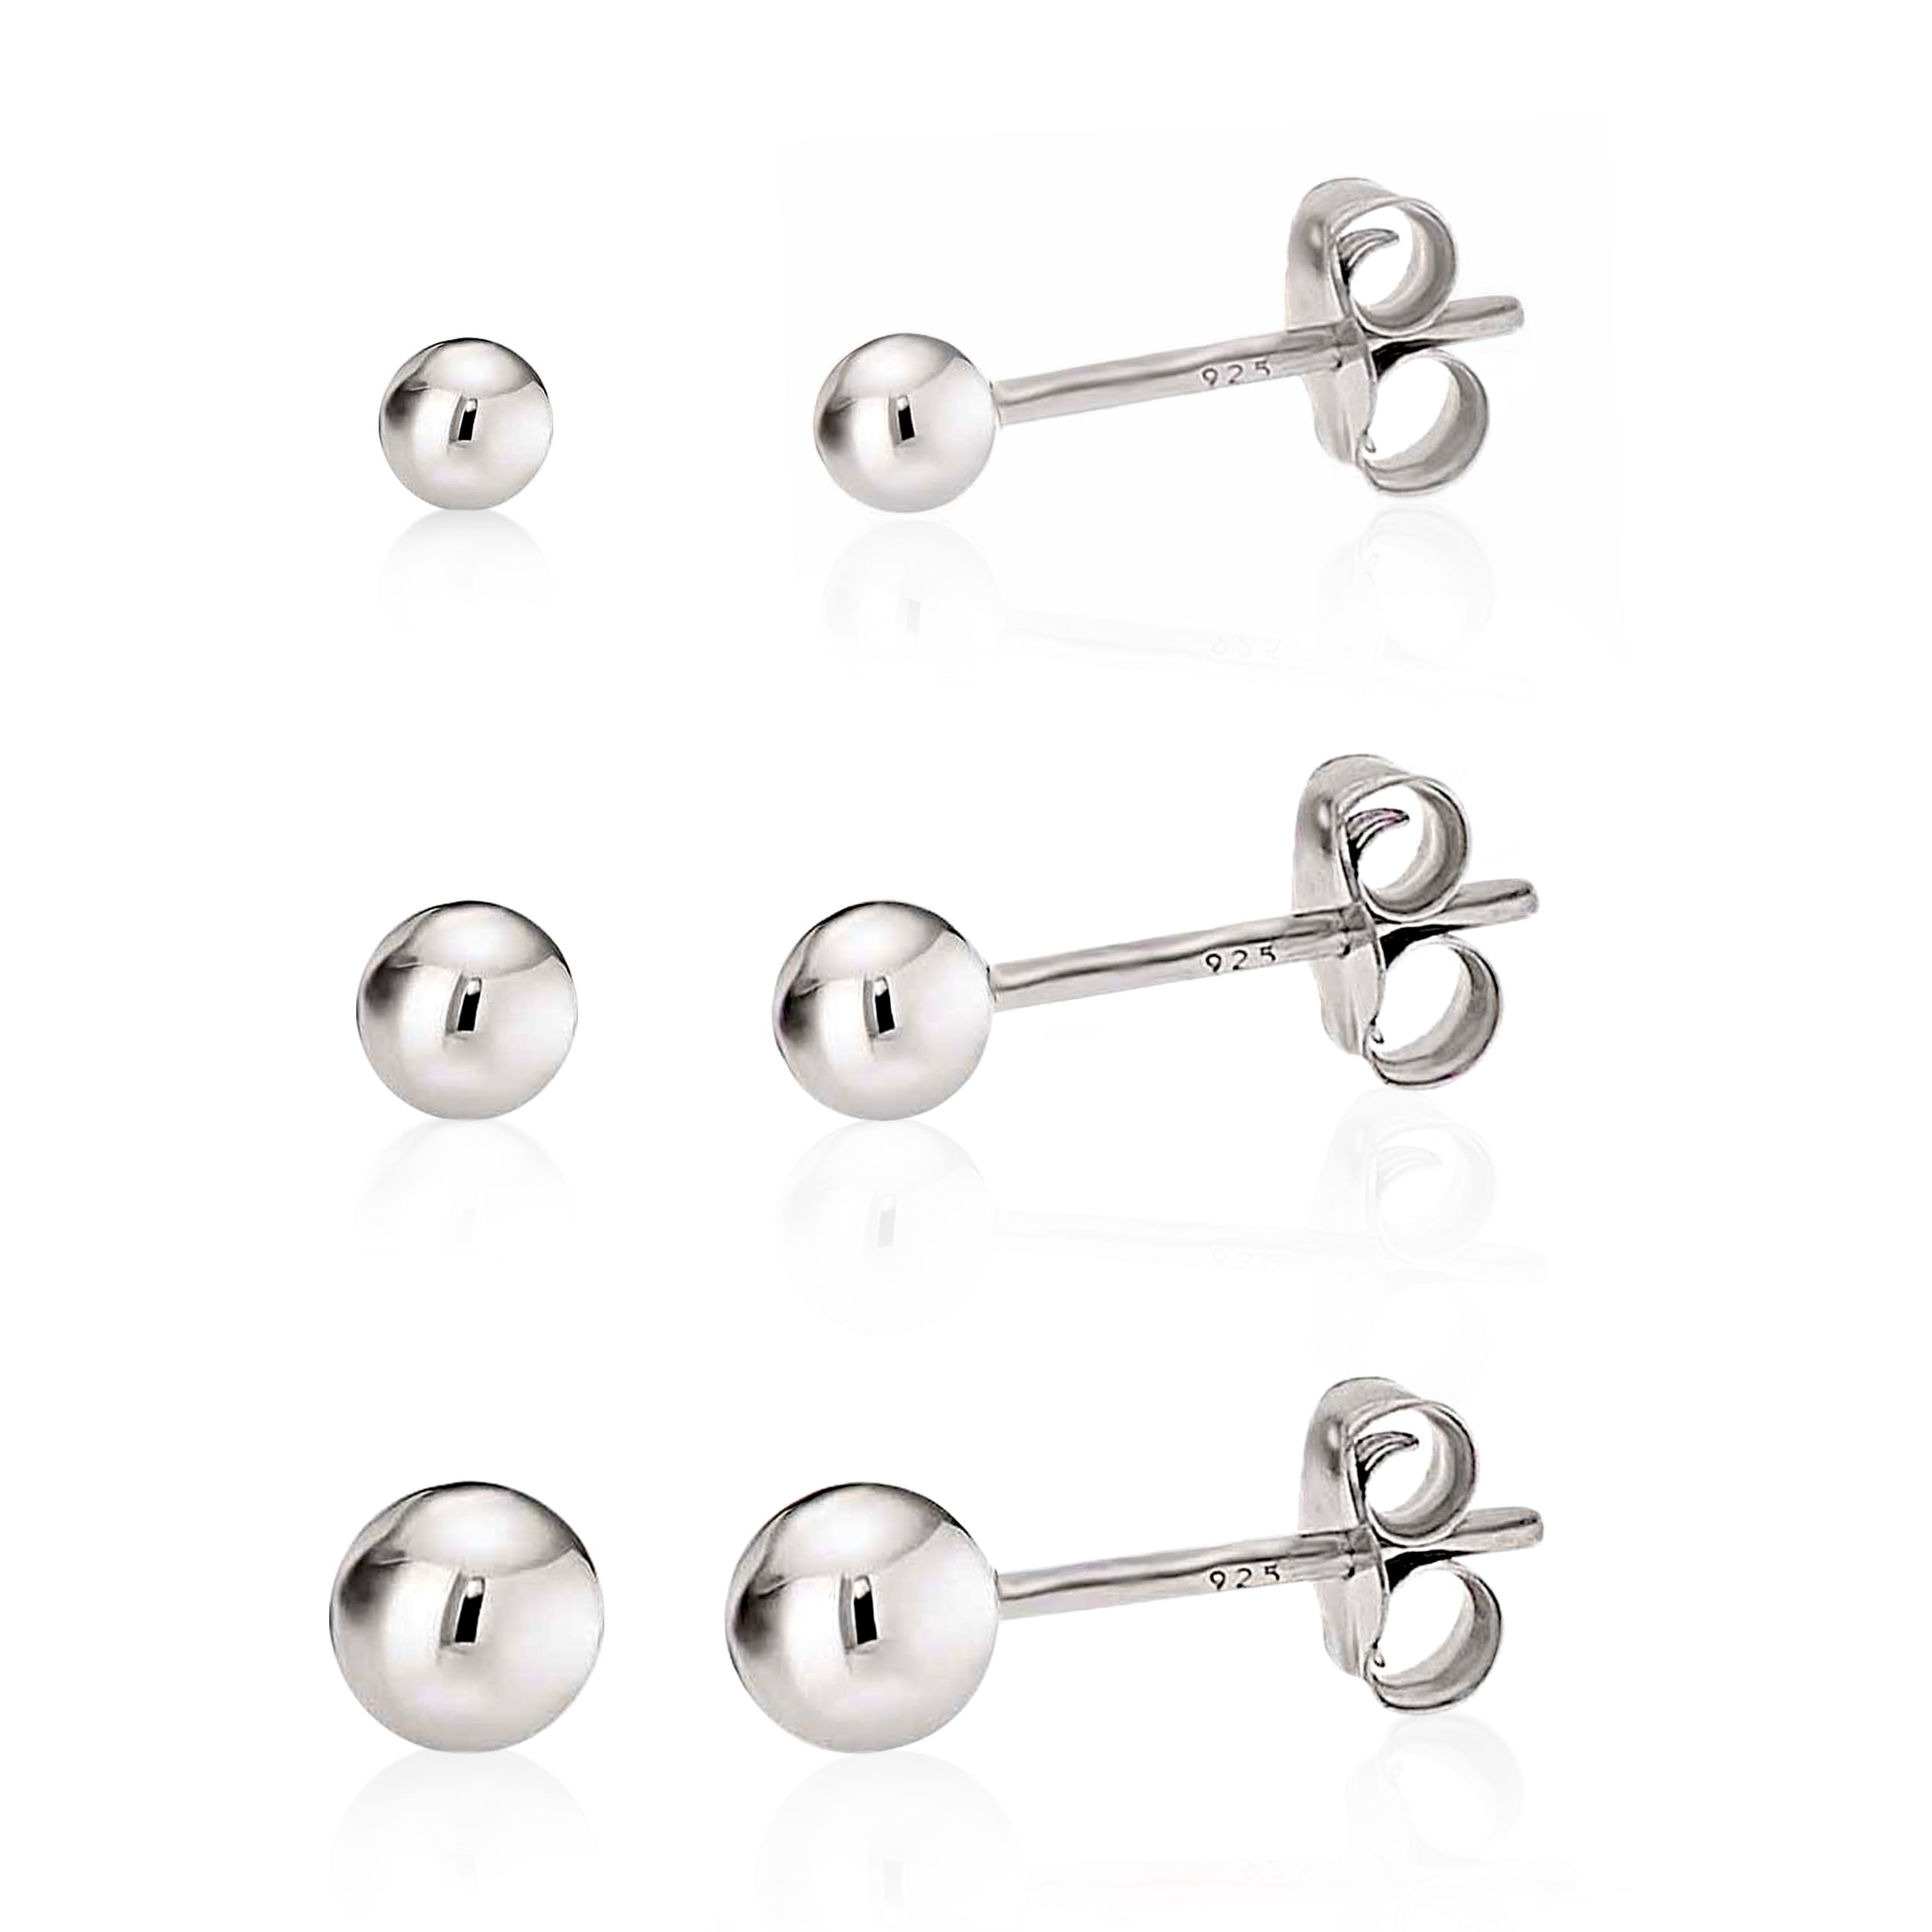 925 Sterling Silver Solid Small Plain Ball Earring Piercing kids girls gift Stud 